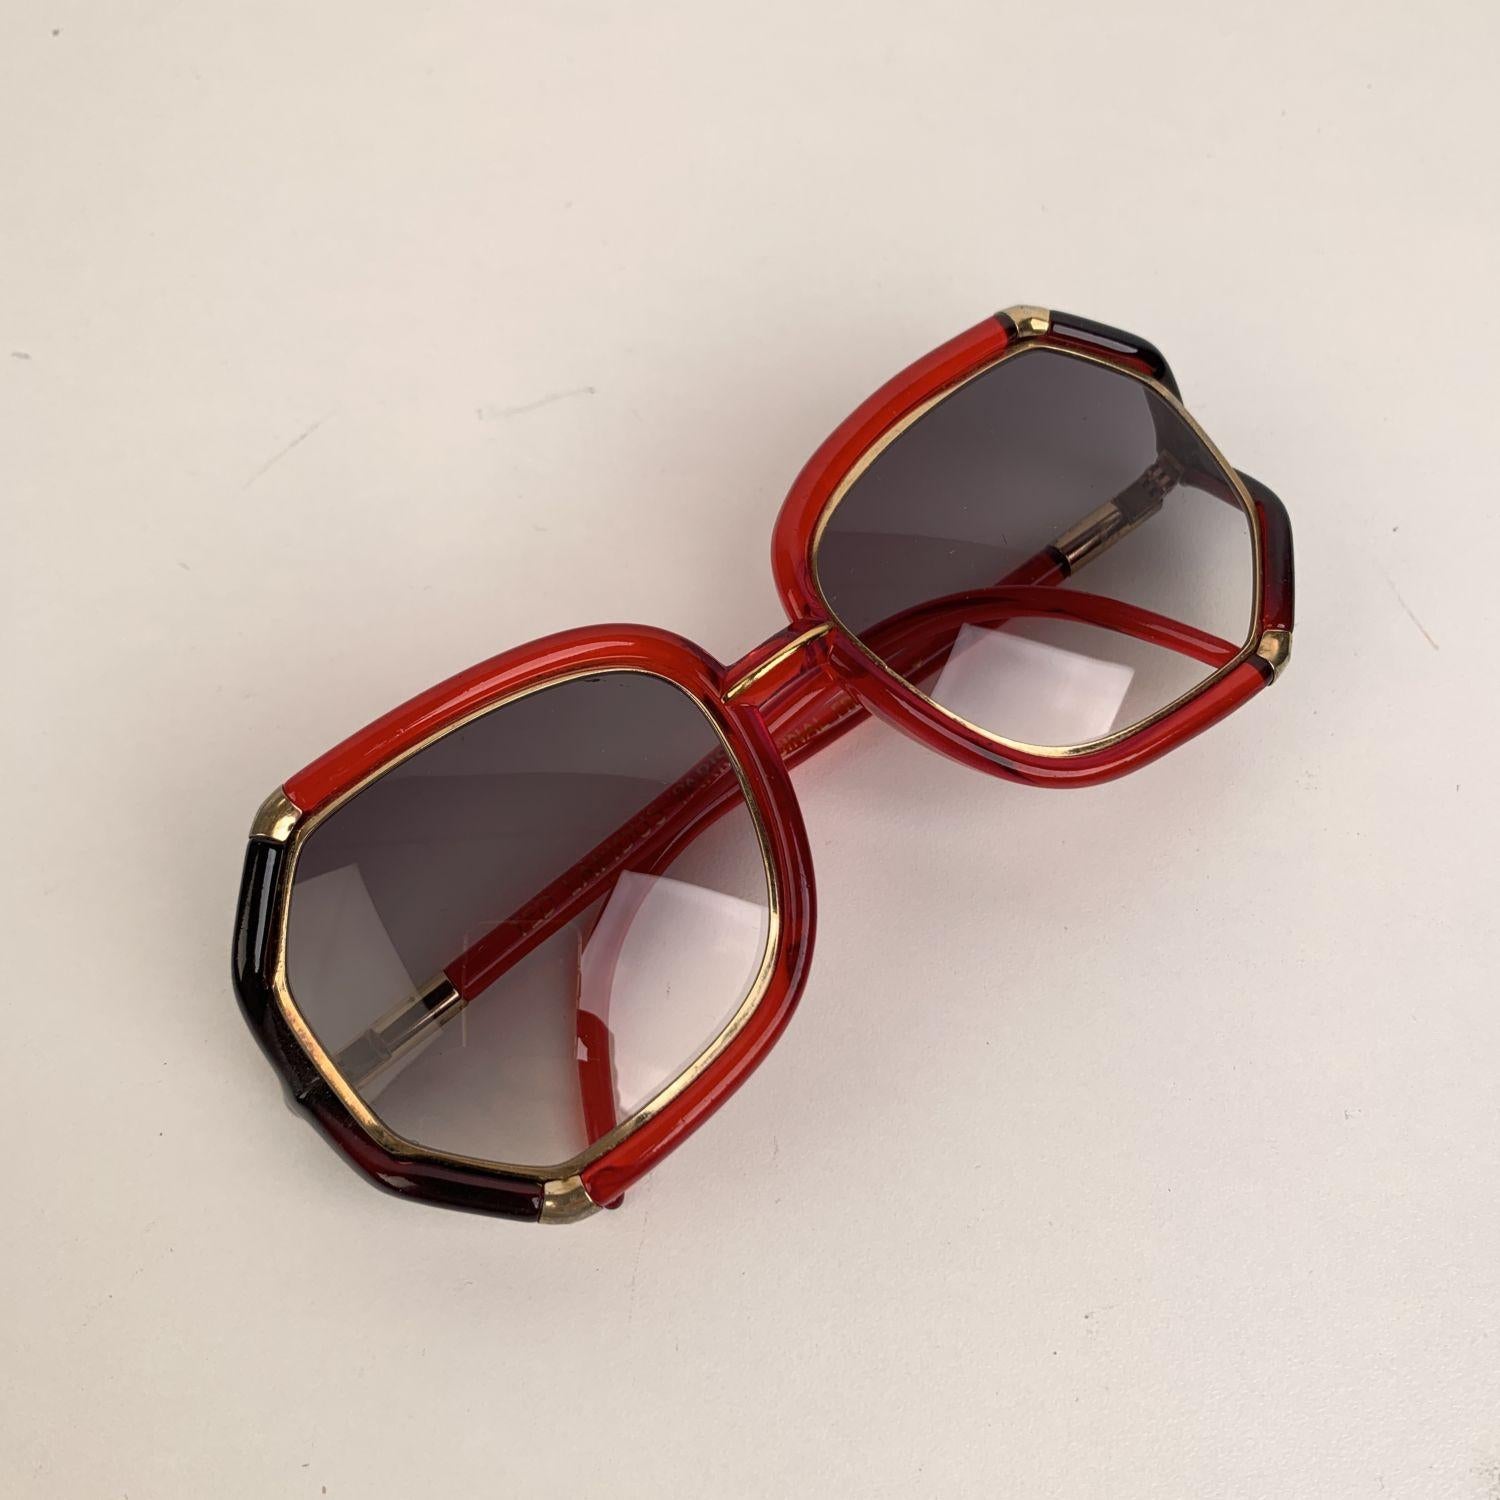 Rare vintage TED LAPIDUS oversized sunglasses mod. TL10 Made in France. Cut-out bicolor red and black frame, with gold metal finish. Gray gradient lenses. 100% UV supreme quality lens. The same model was worn by Jennifer Lawrence in the film